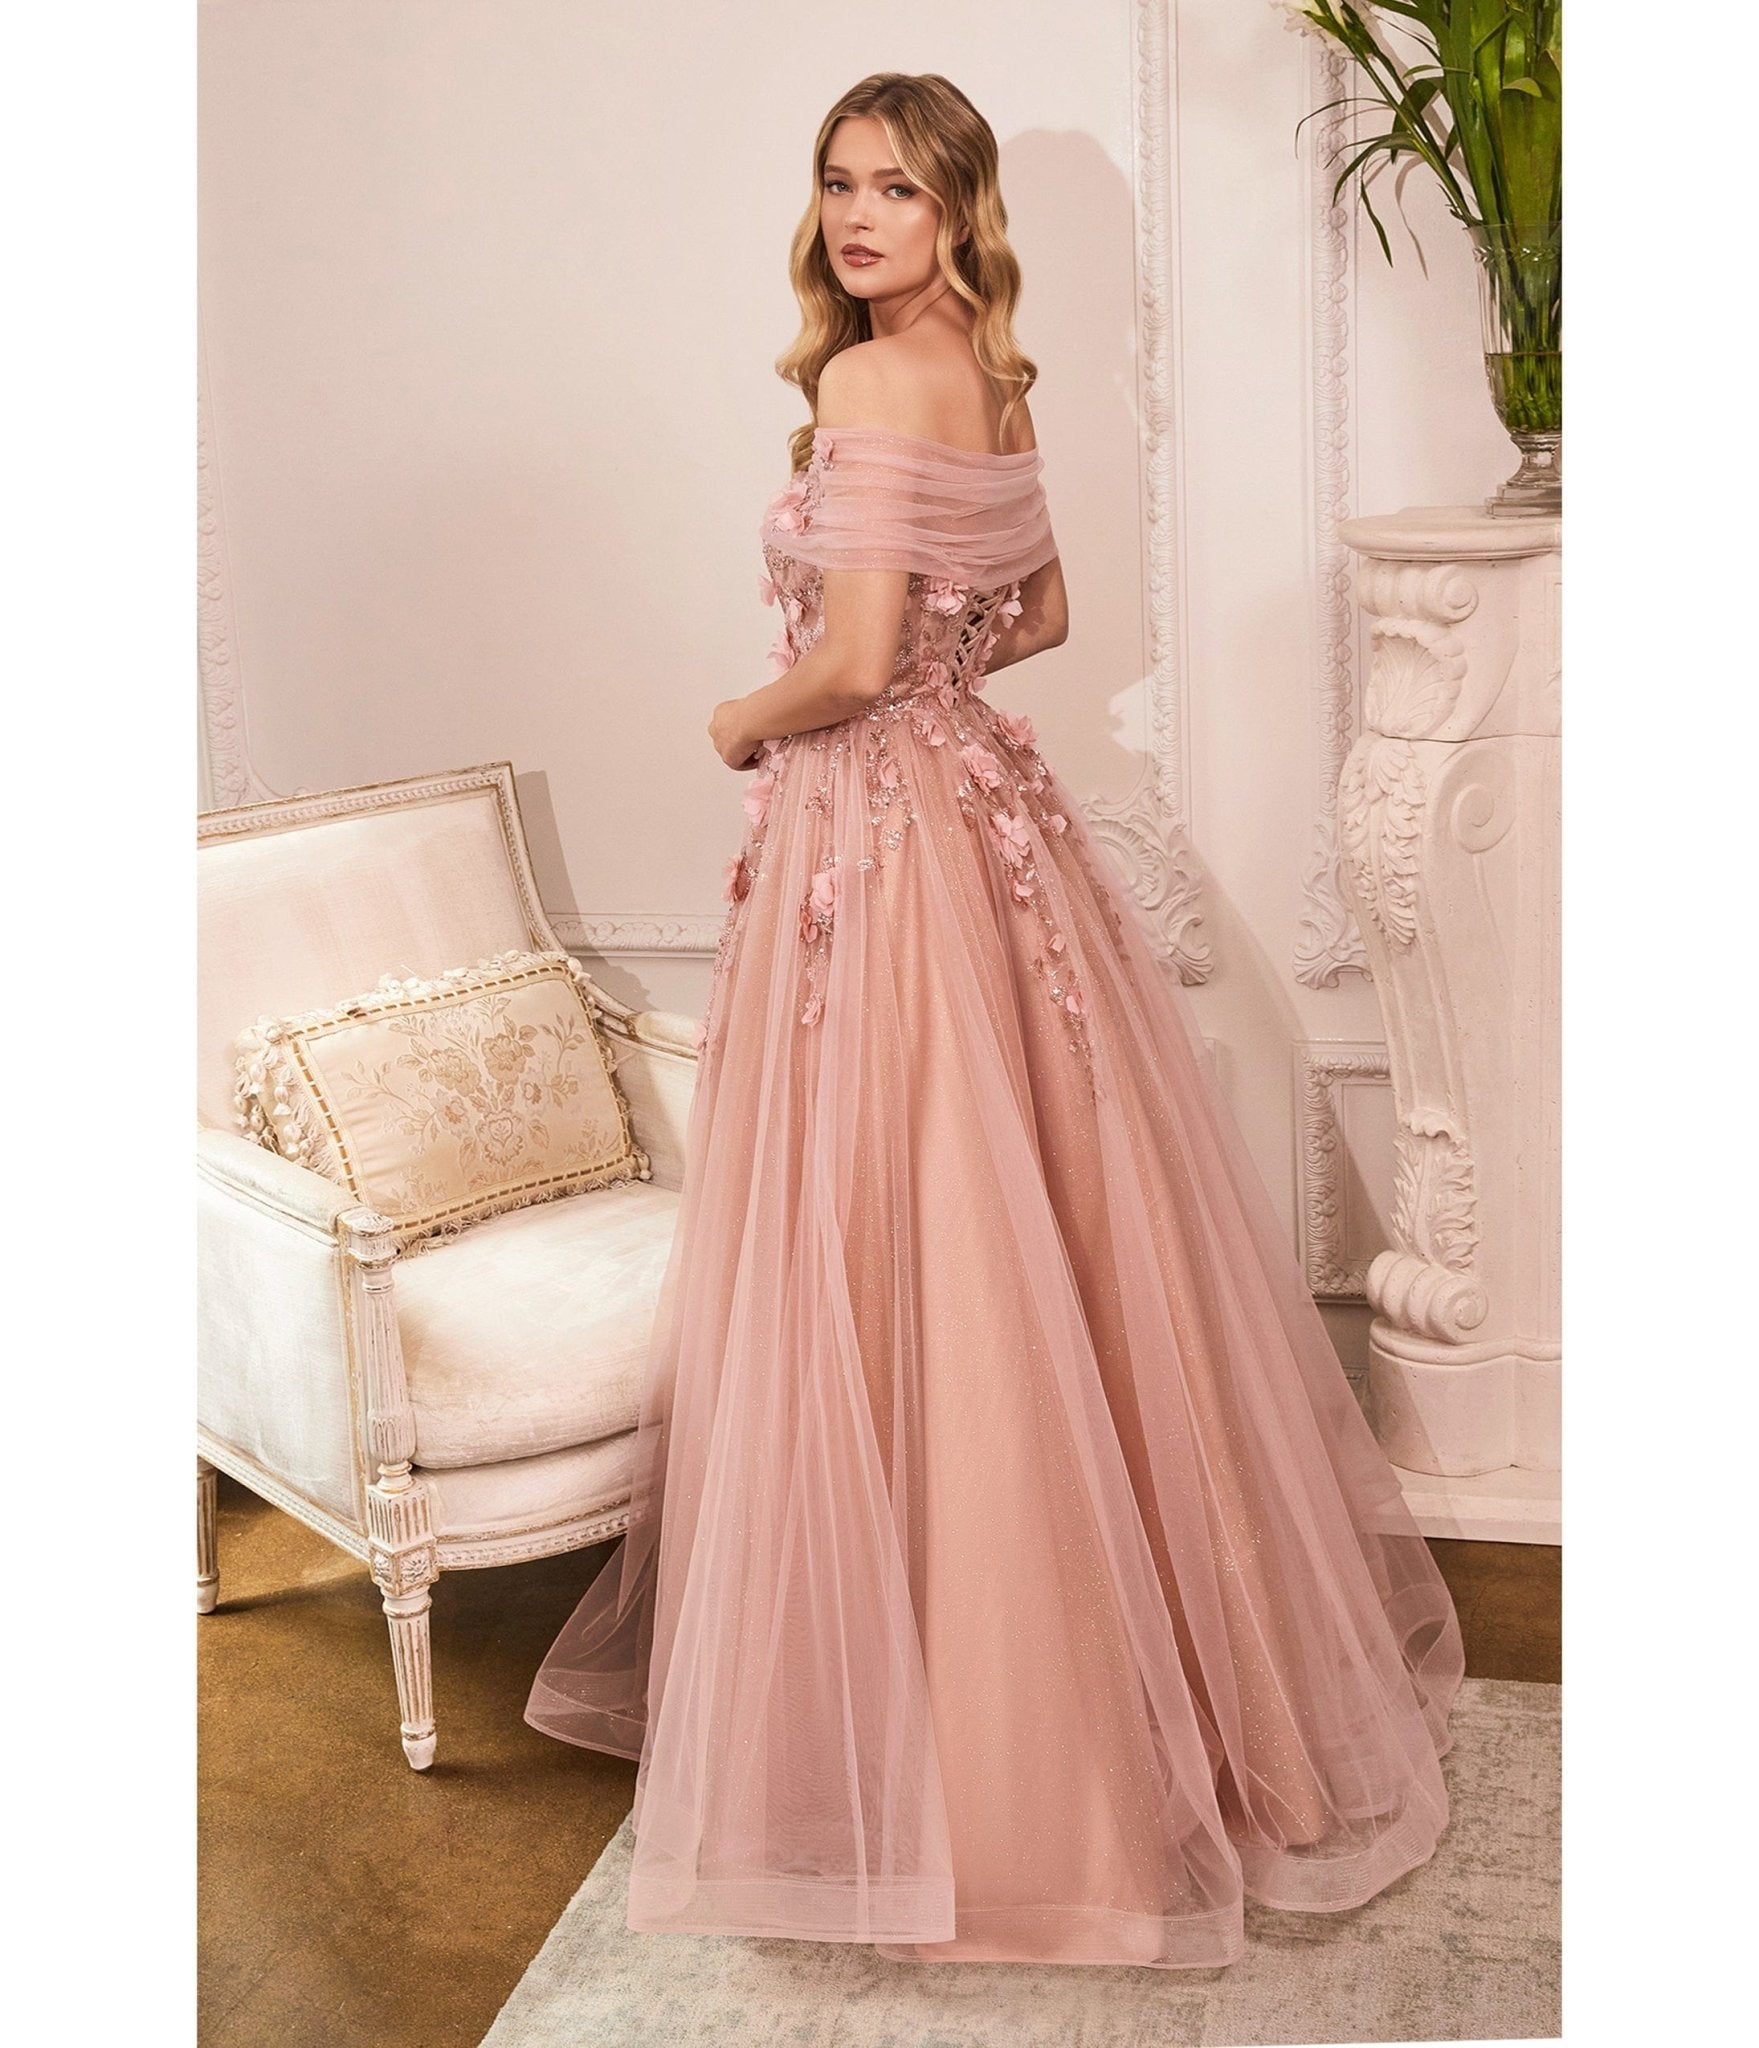 Pink Floor Length Prom Dresses | Pink Prom Gowns Formal Dresses - Pink  Sequin Prom - Aliexpress